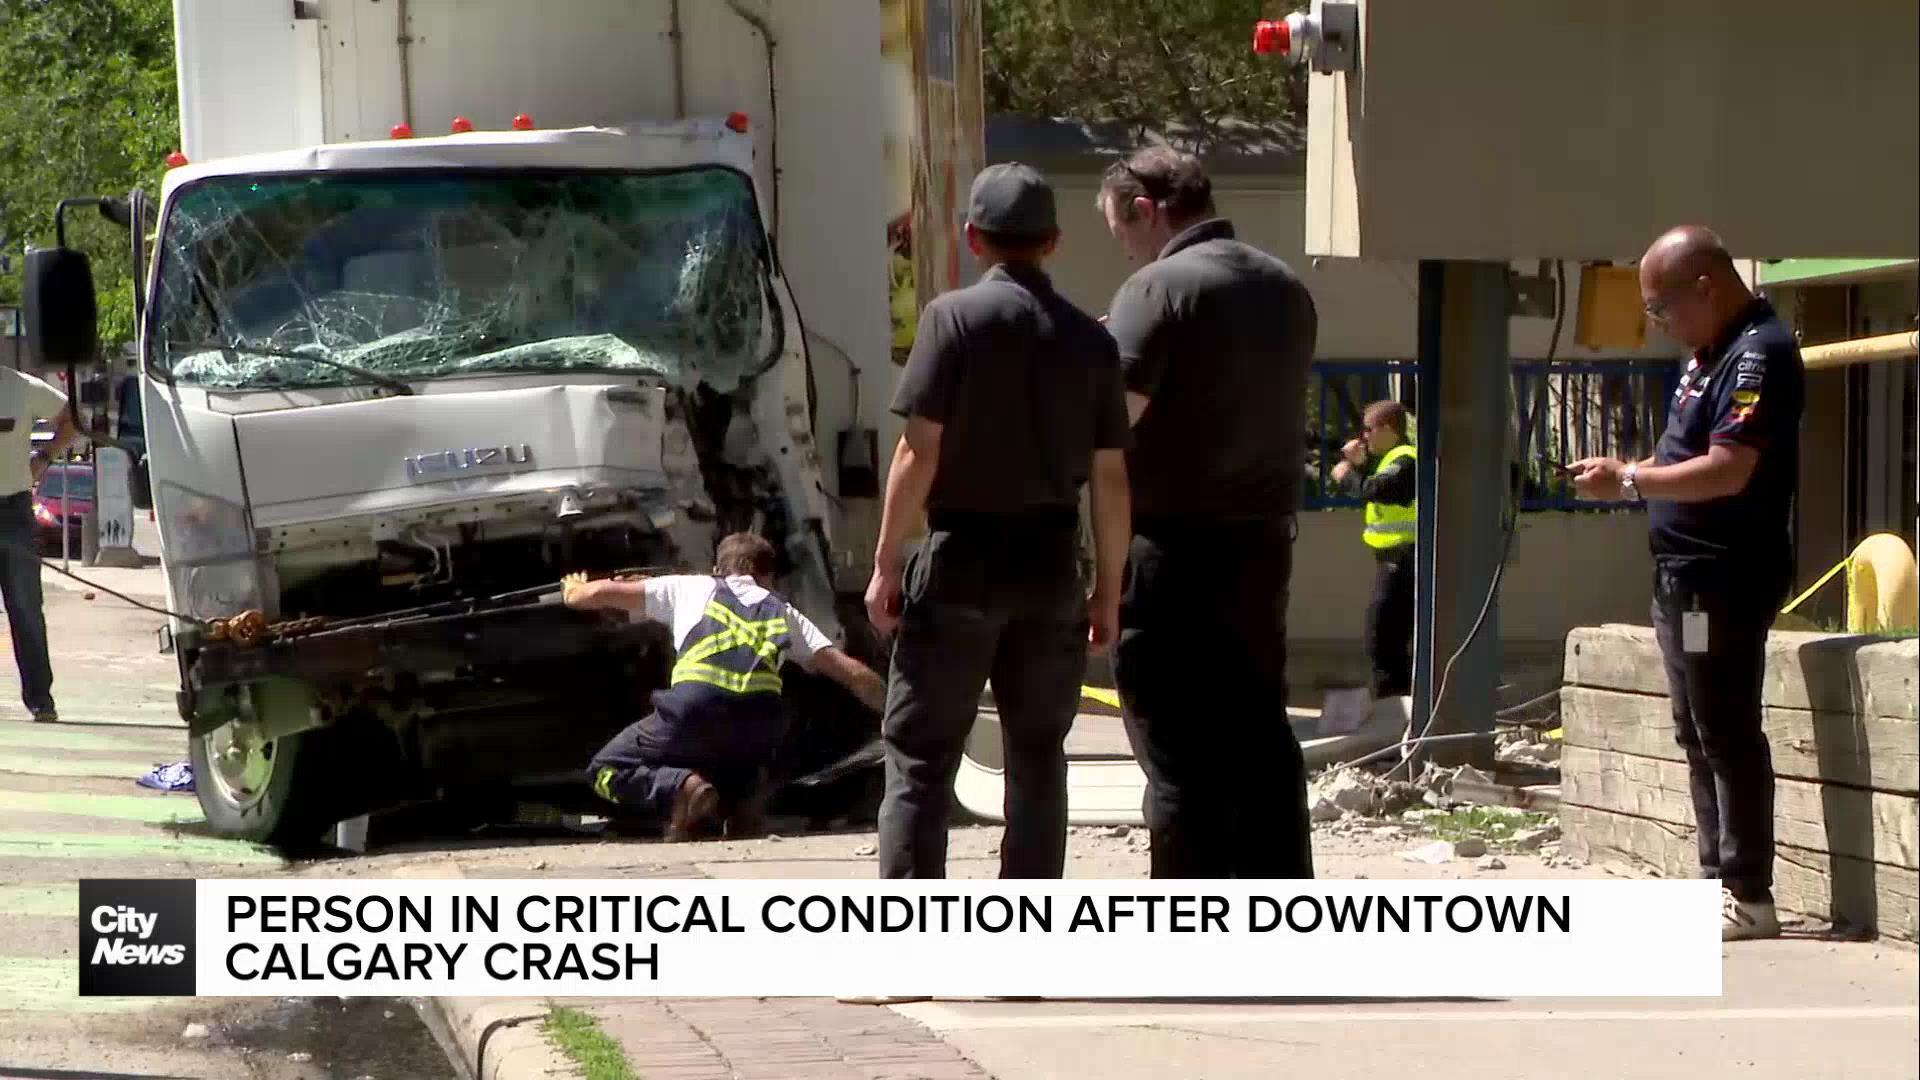 One person critically hurt after truck crashes into building in downtown Calgary